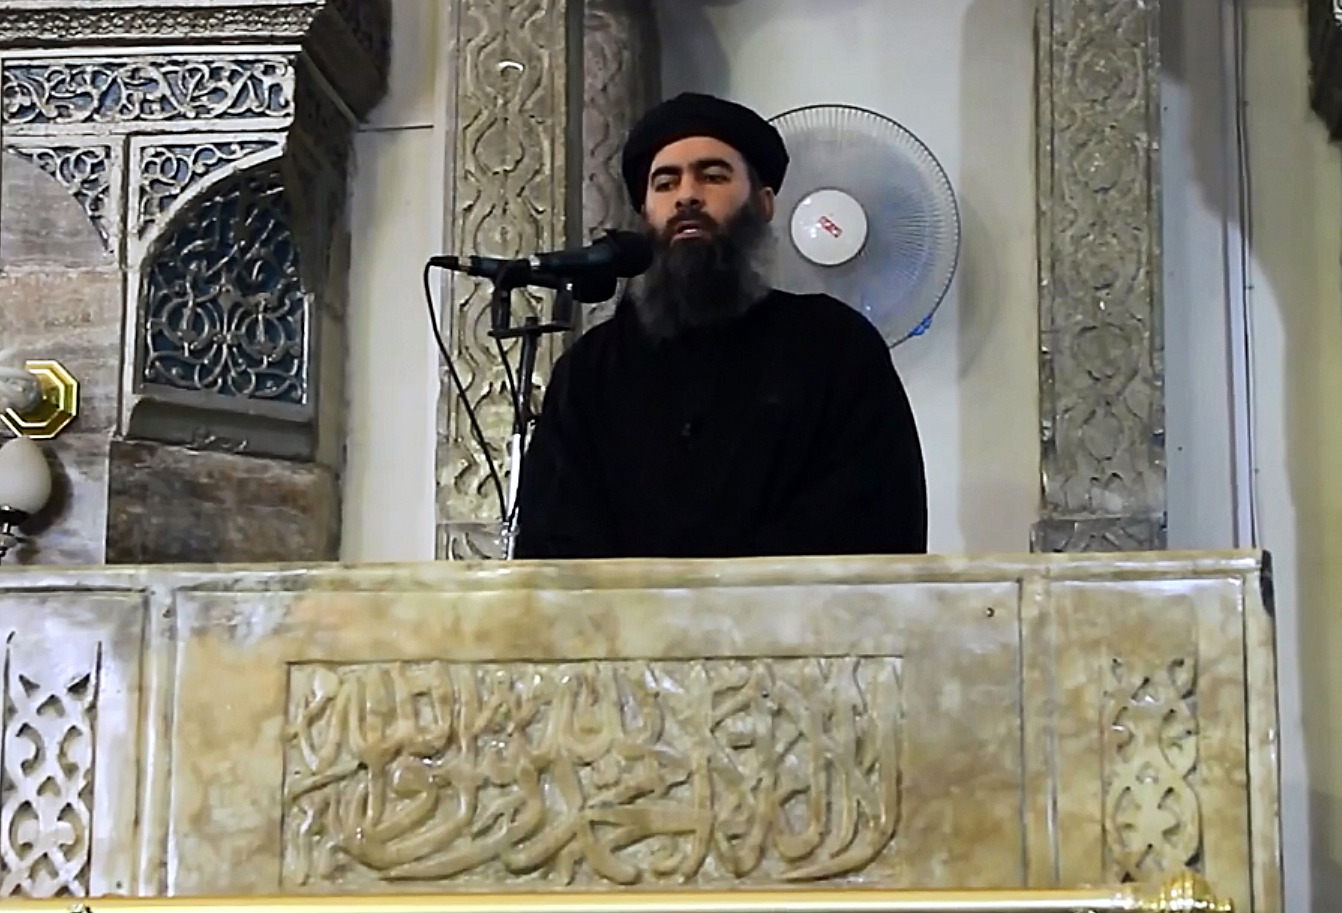 Alleged ISIL leader appears in video footage